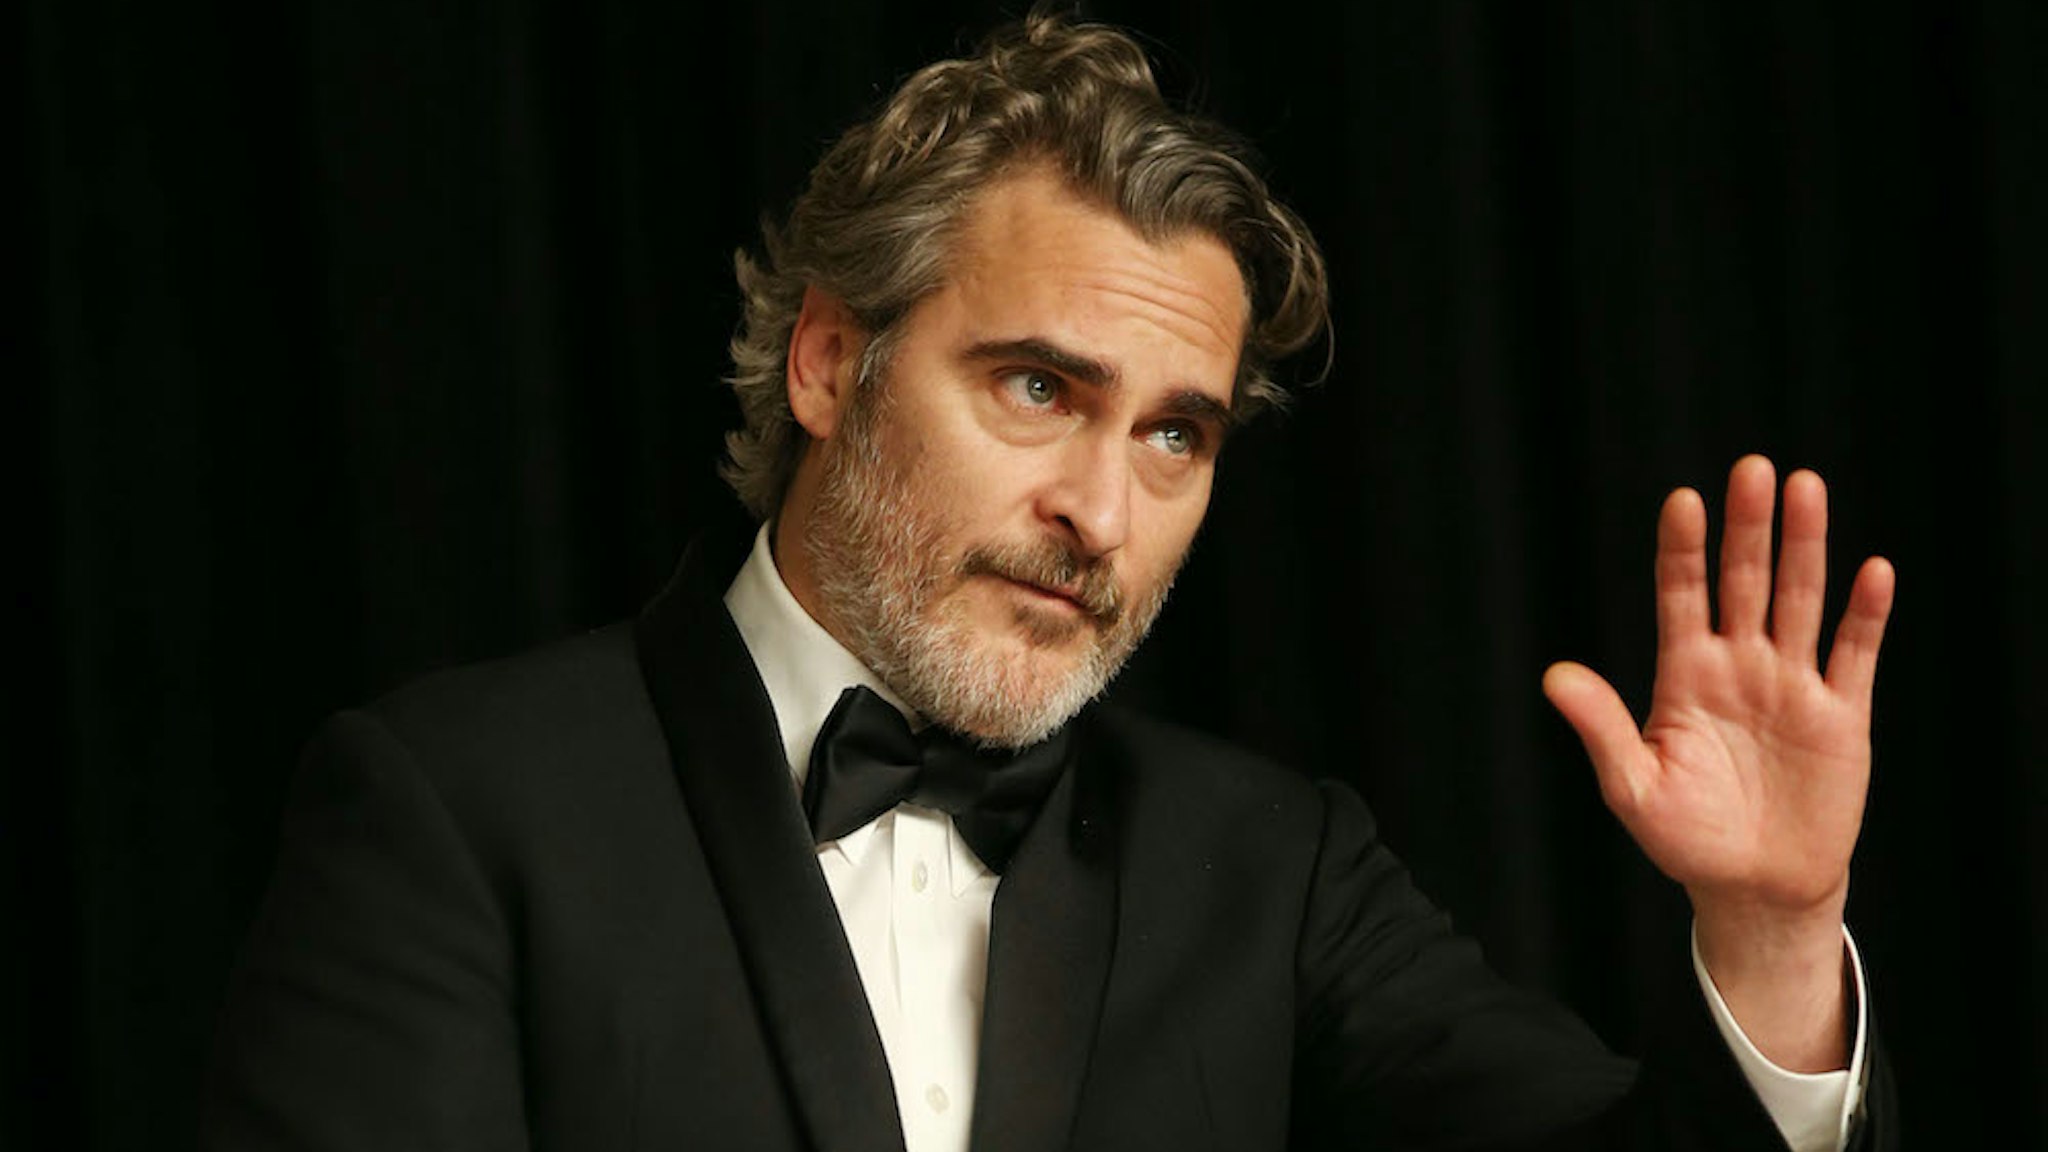 Joaquin Phoenix poses for photos after winning the Best Actor award for "Joker" at the 92nd Academy Awards ceremony at the Dolby Theatre in Los Angeles, the United States, Feb. 9, 2020. (Photo by Li Ying/Xinhua via Getty)